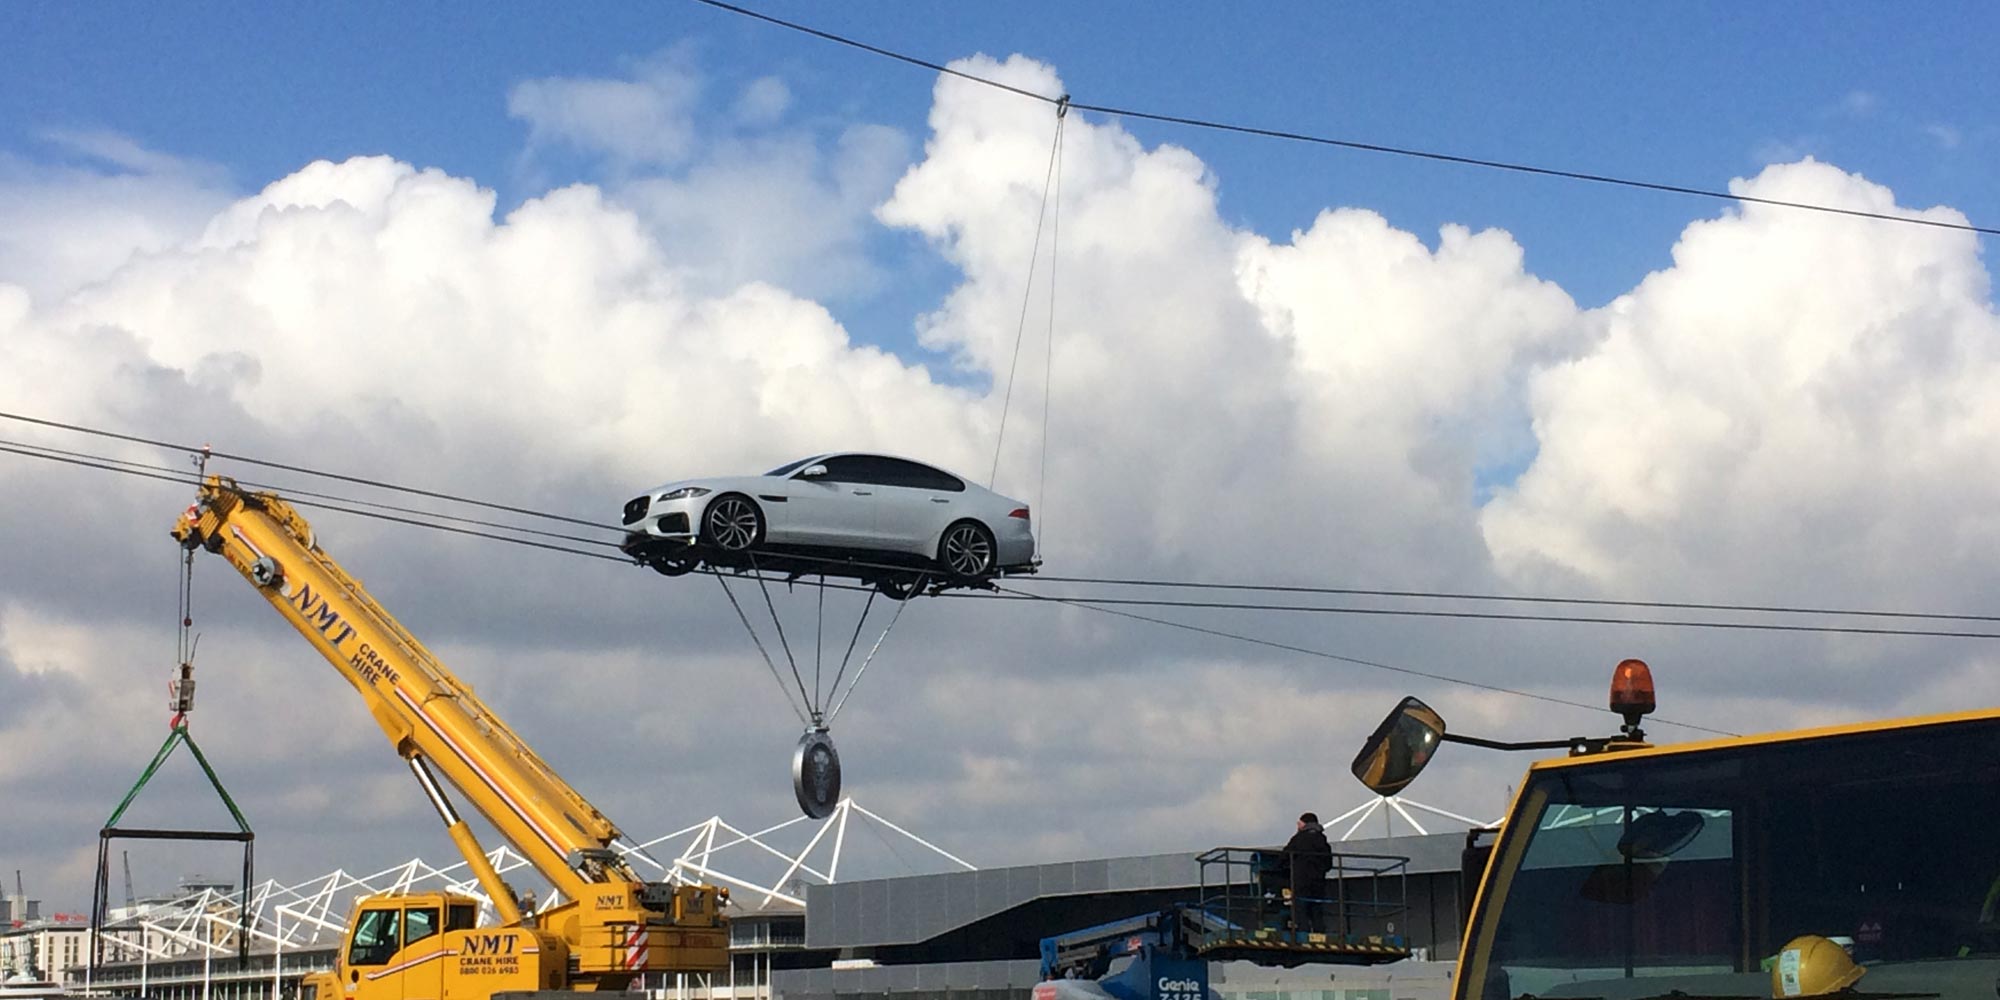 Want a car to cross the Thames on a tightrope for an advertising campaign?